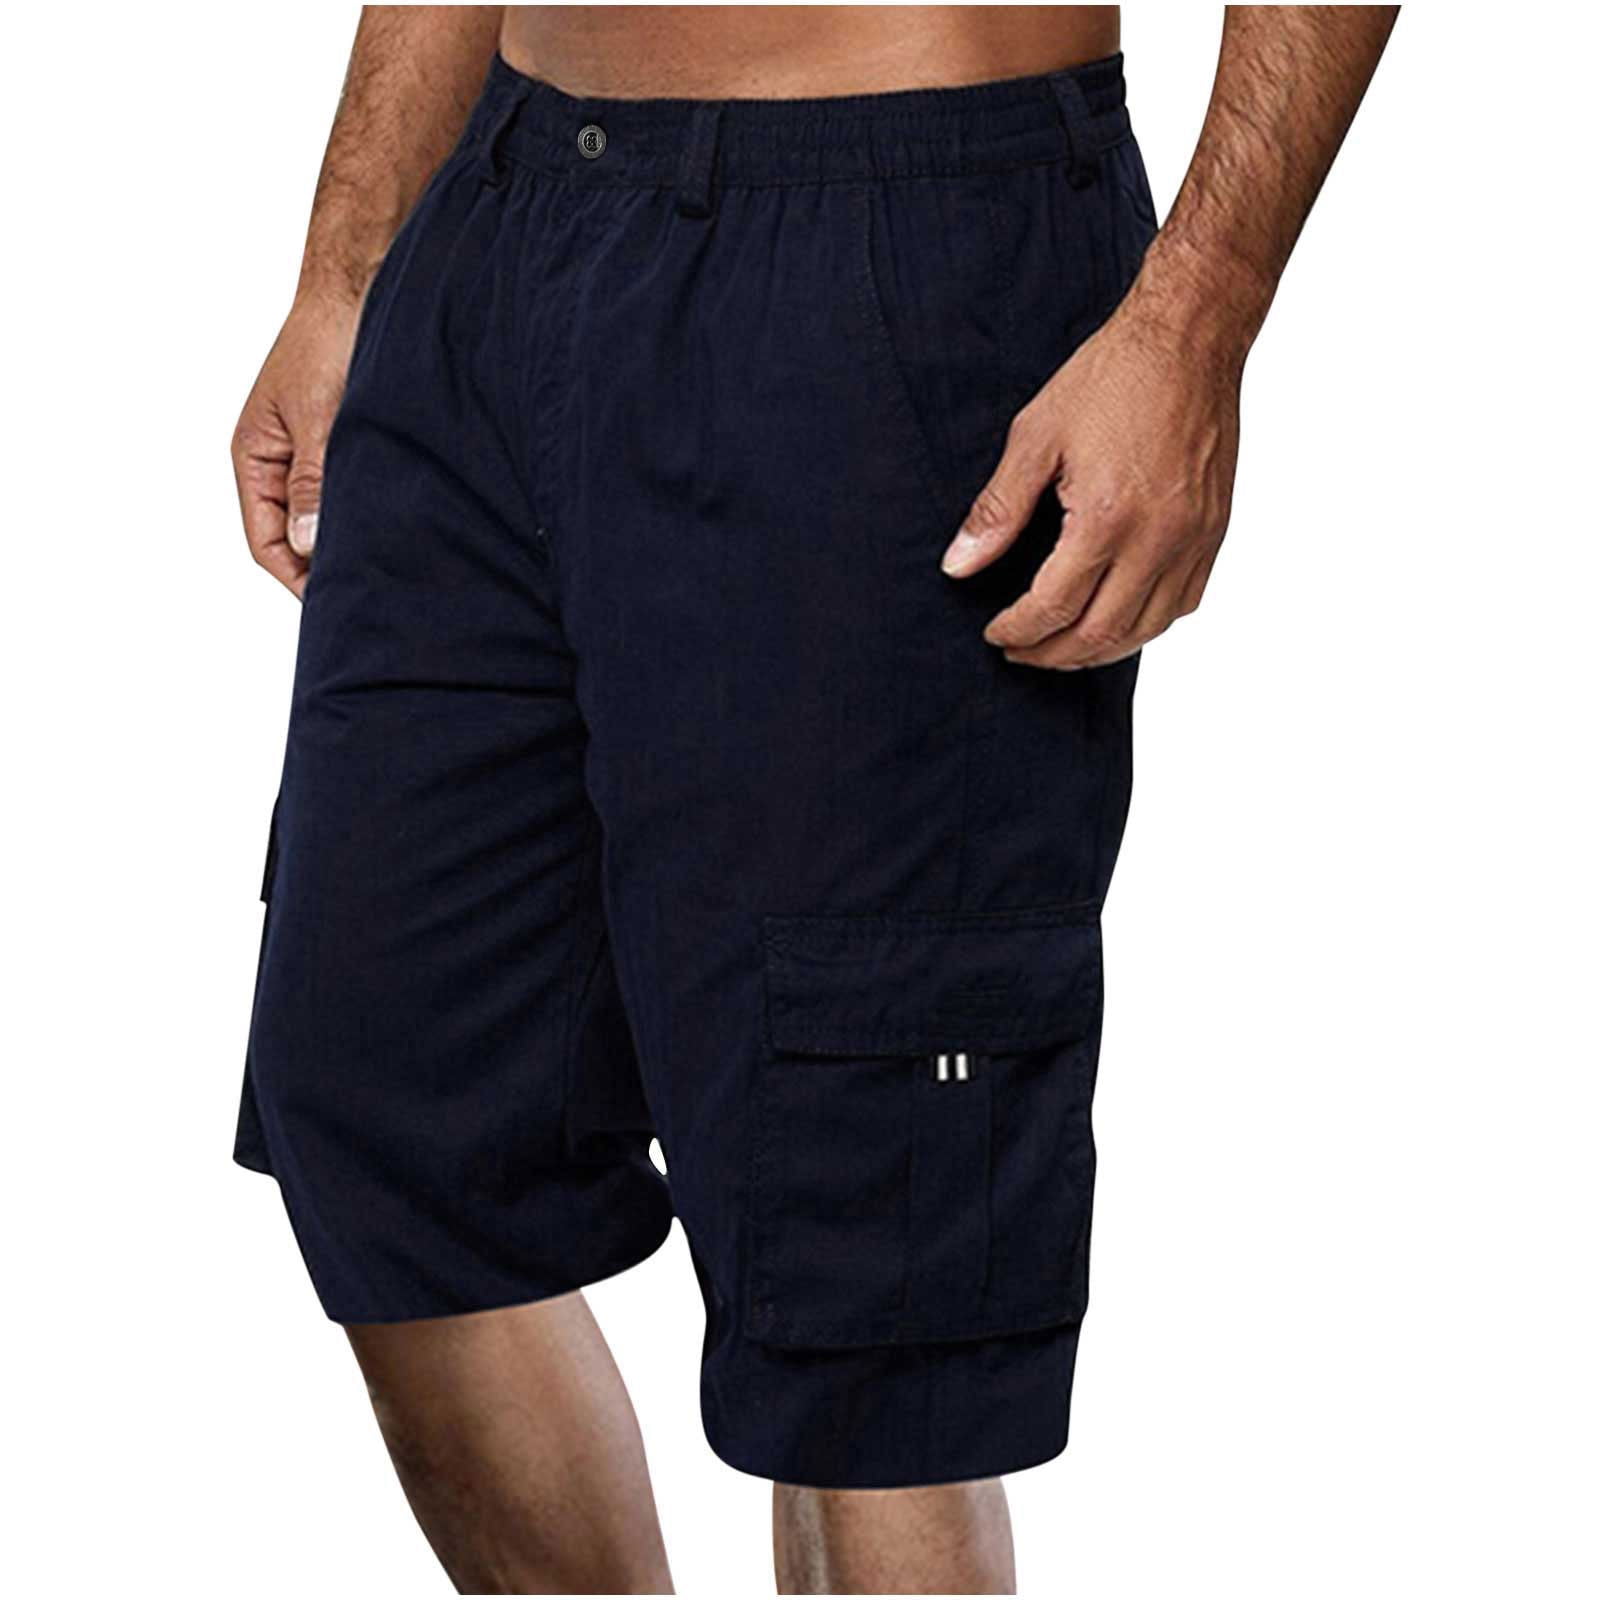 Jerdar Shorts for Men Casual Solid Knee Length Cargo Pants with 